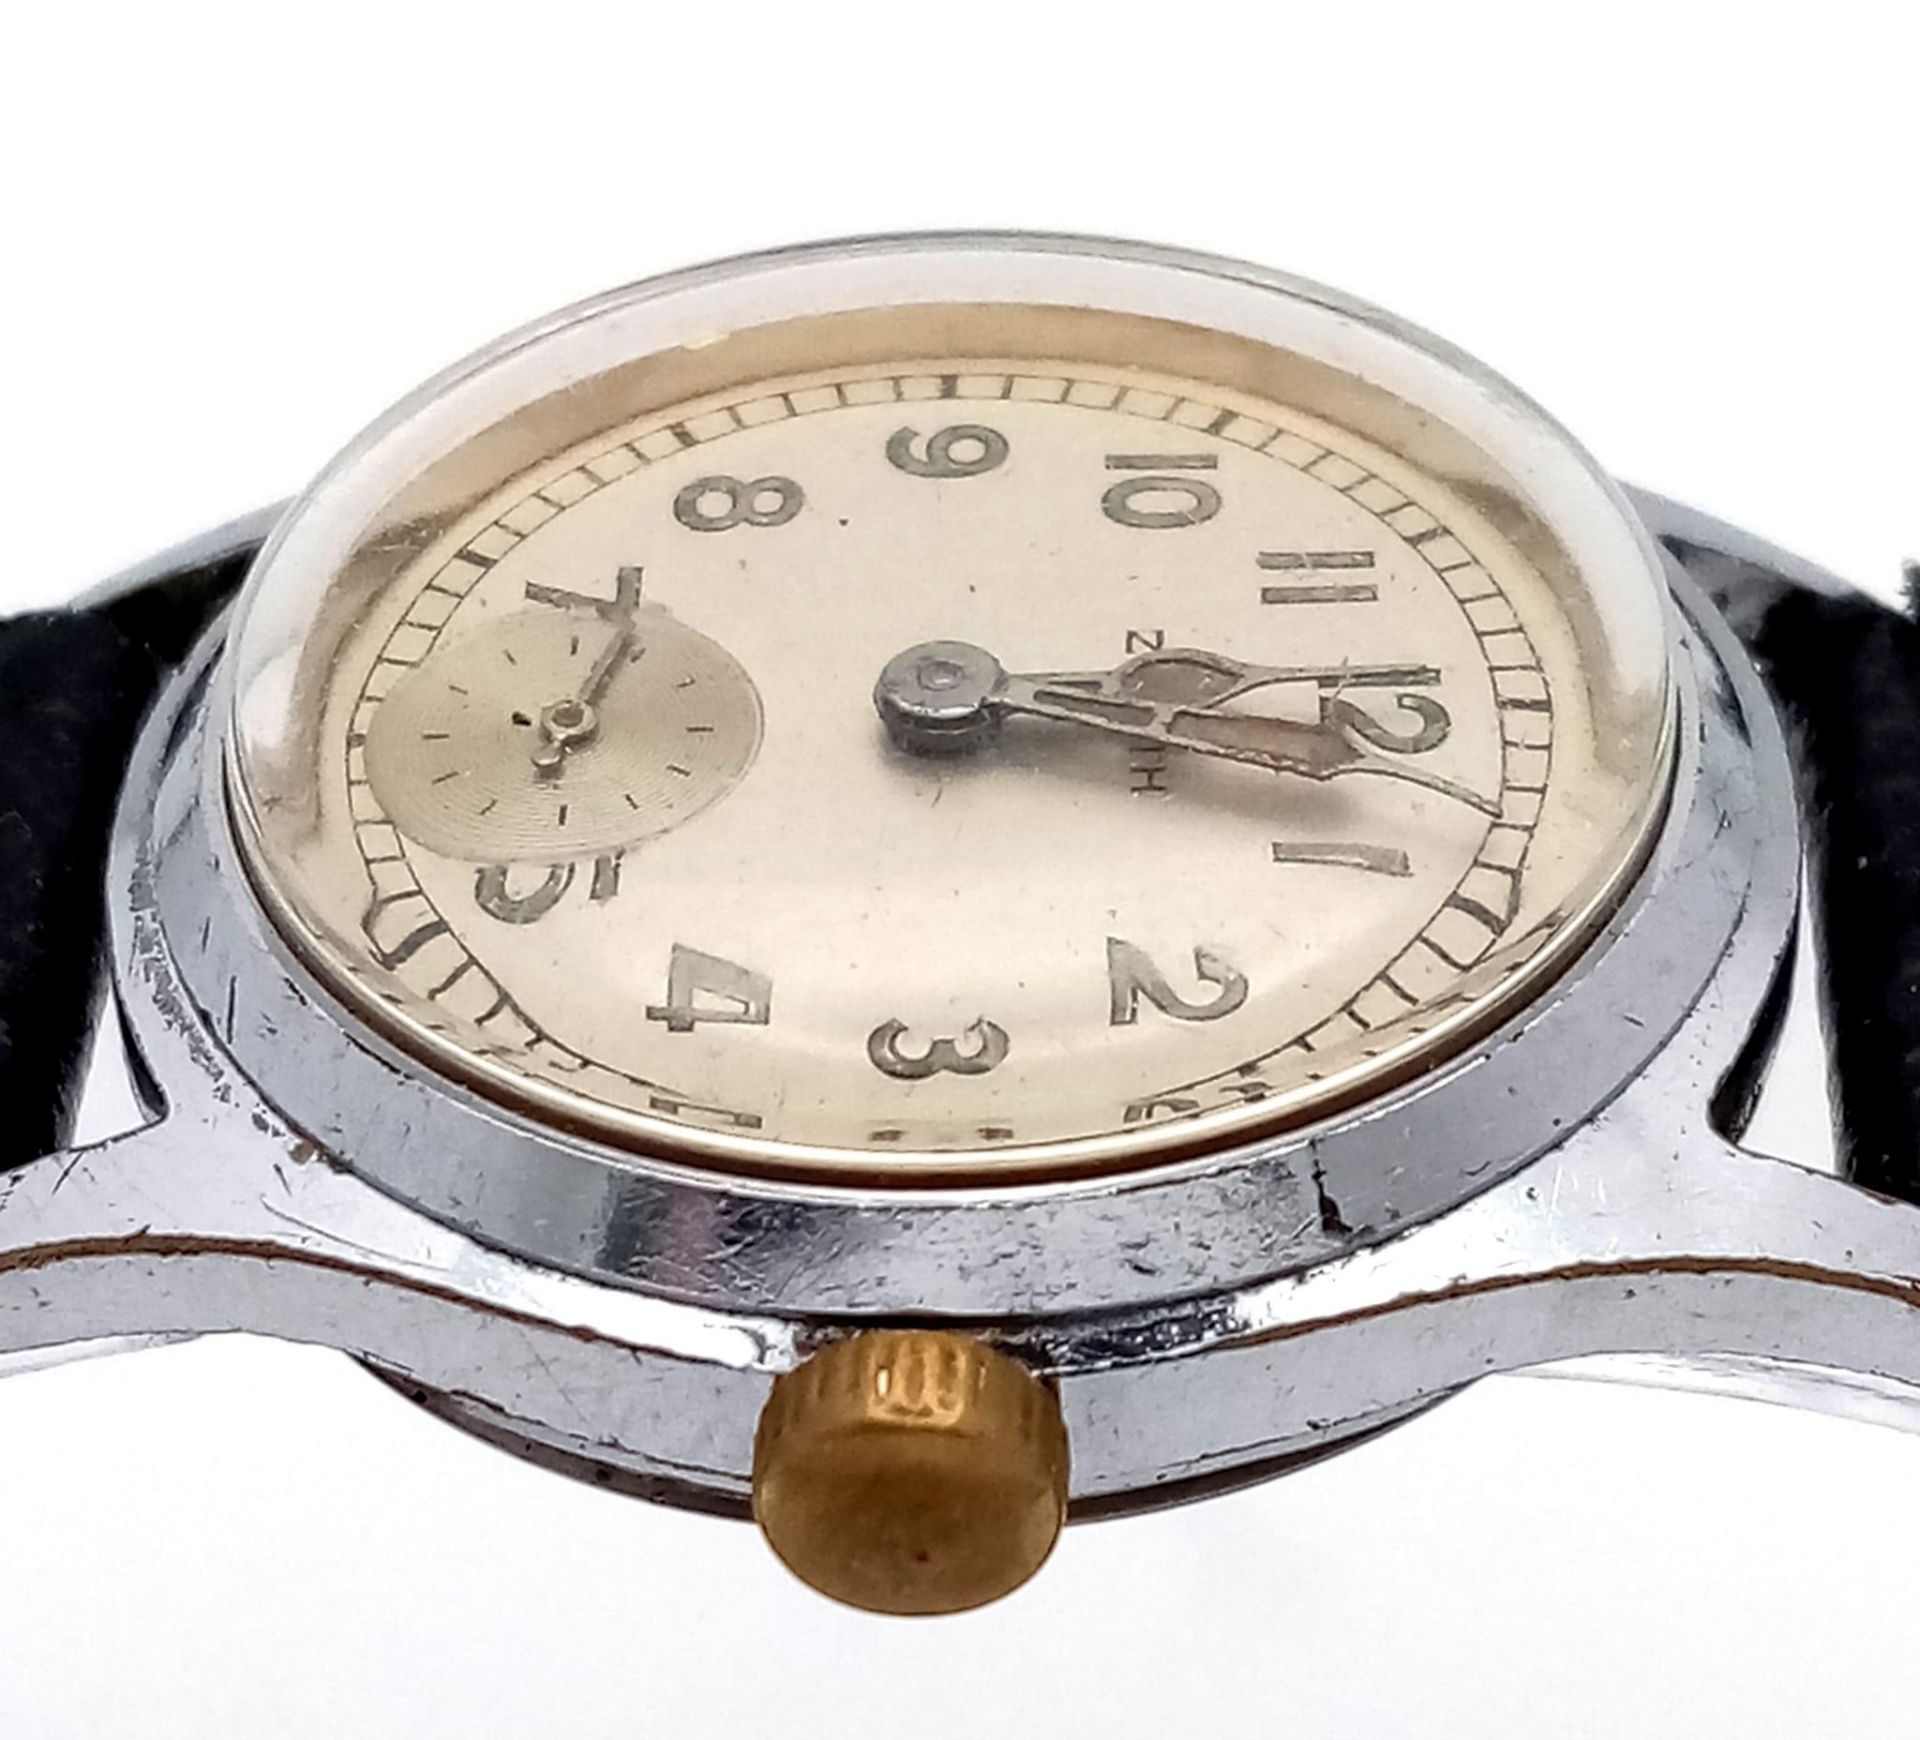 A Vintage Zenith Ladies Watch. Brown leather strap. Stainless steel case - 28mm. Silver tone dial - Image 5 of 8